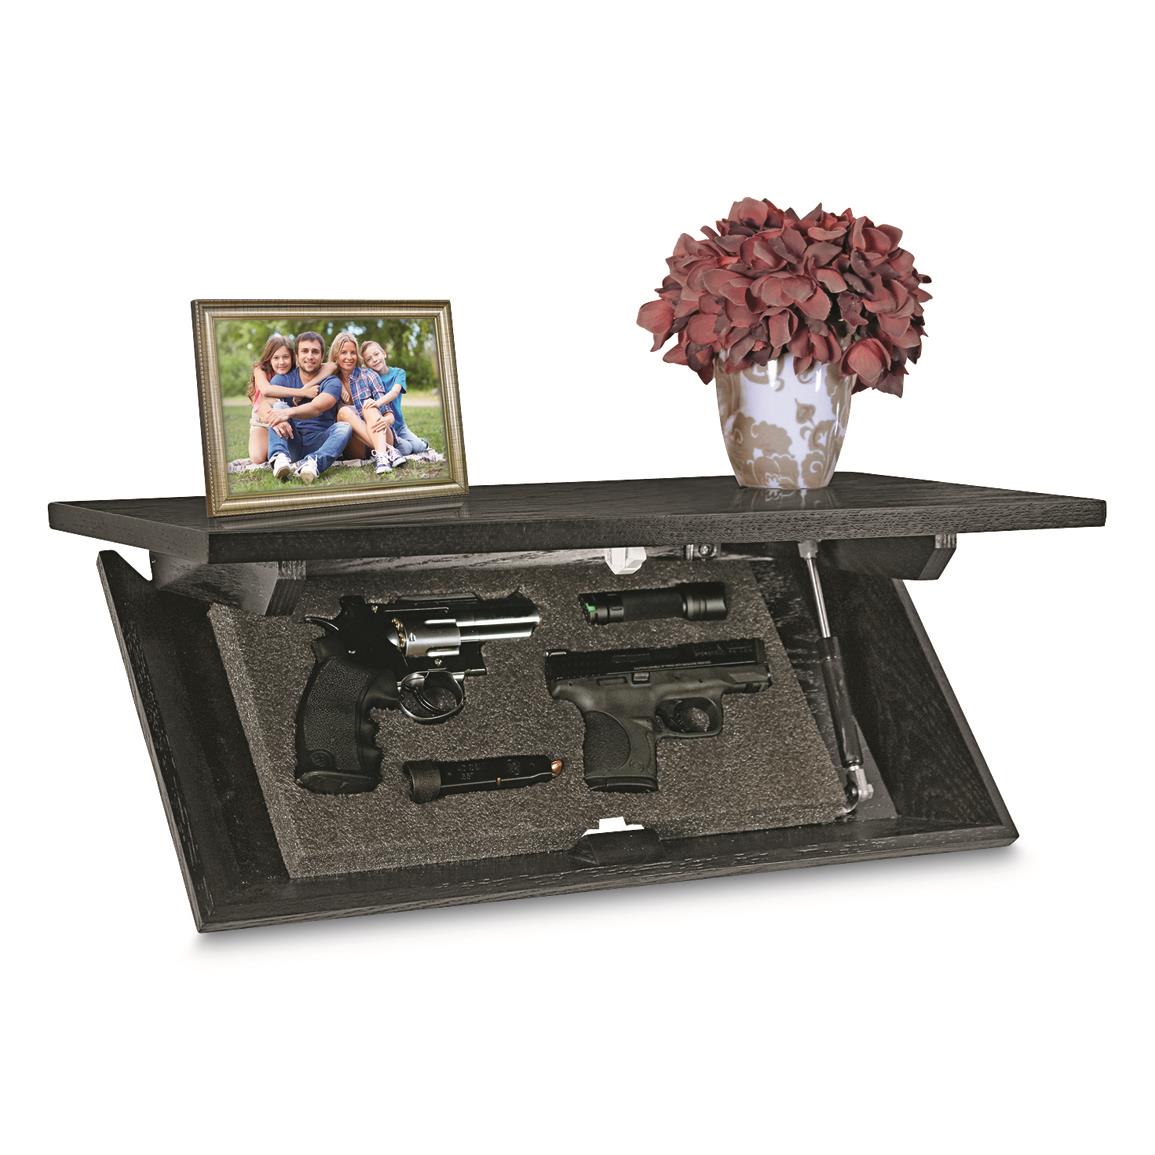 Drop-down concealment compartment can be customized to your needs